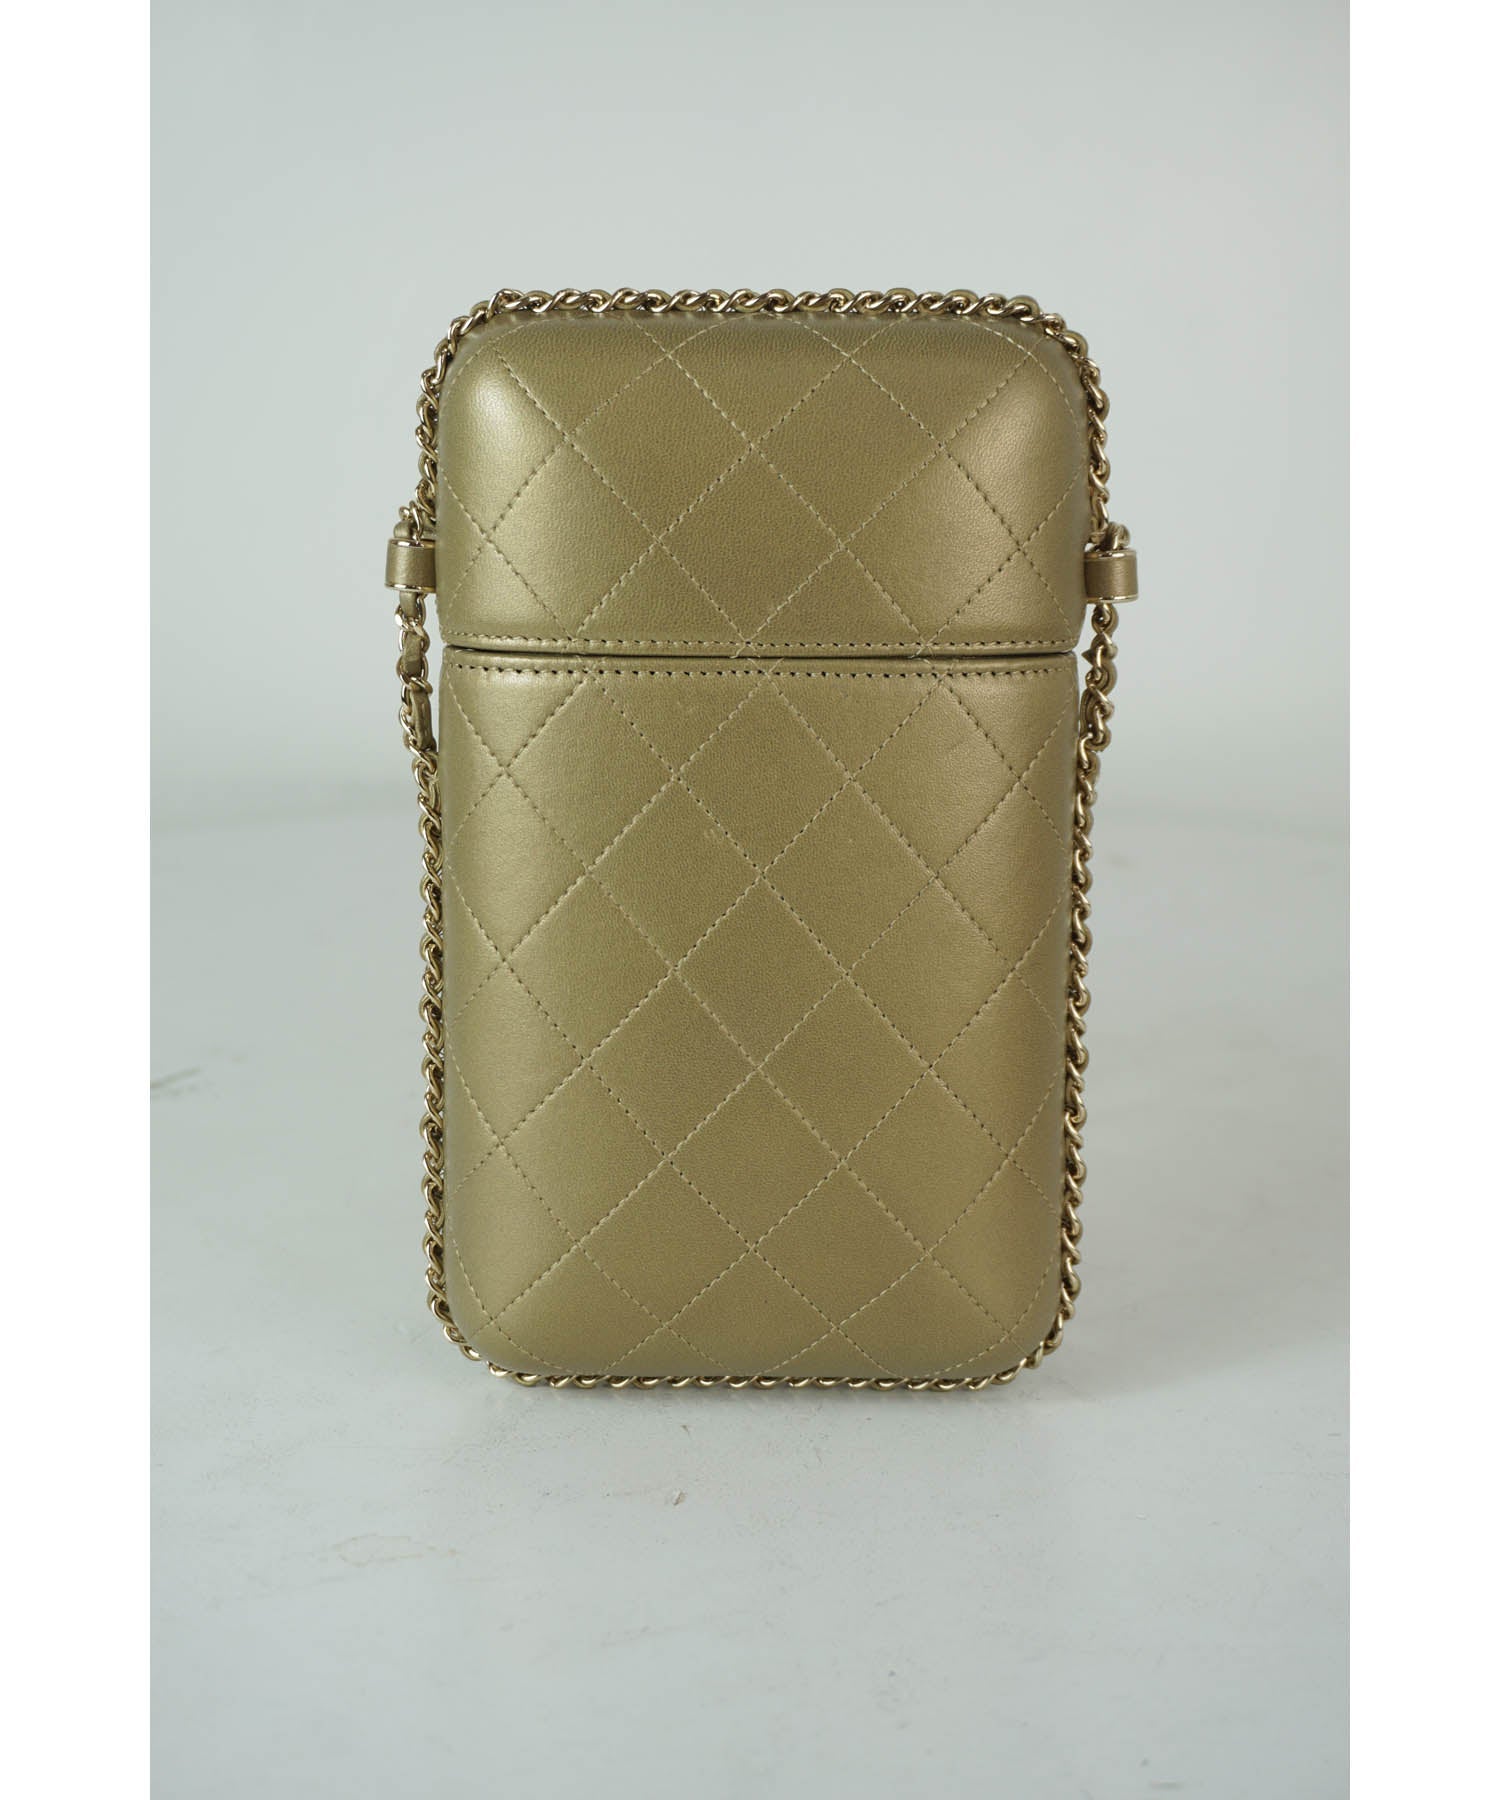 Chanel Chain Around Phone Holder Box Crossbody Quilted Lambskin at